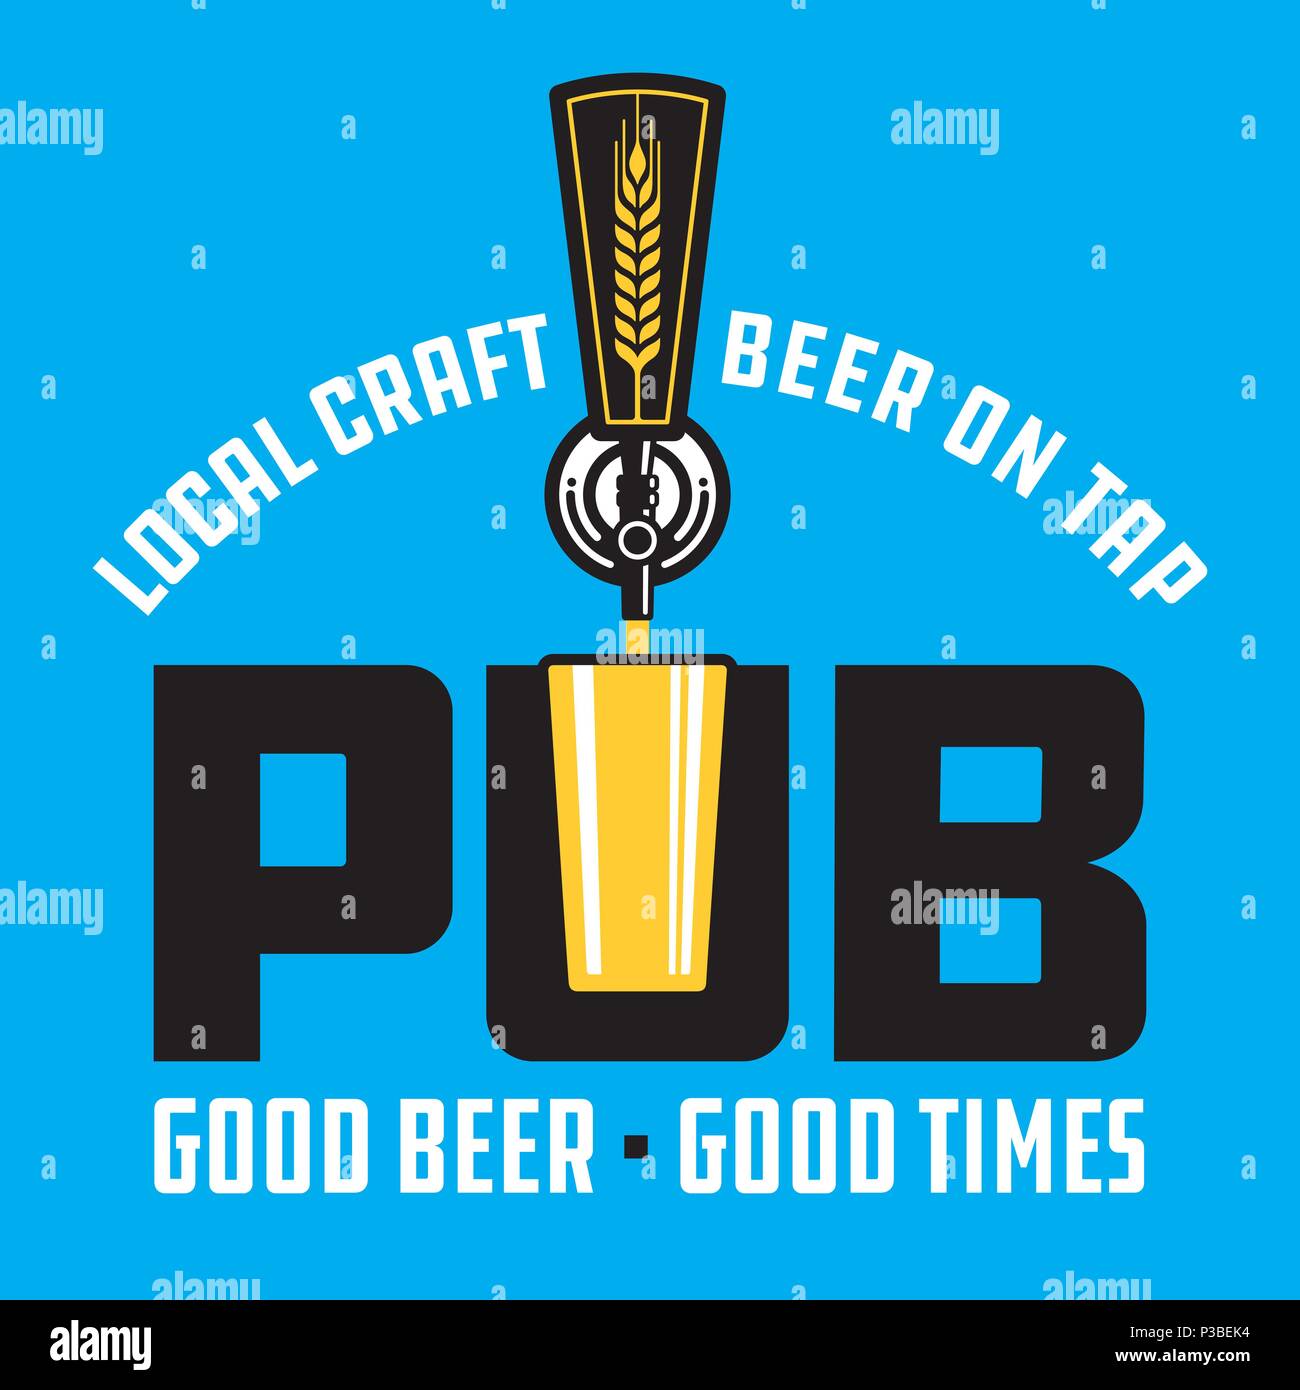 Pub Craft Beer Vector Design. Vector illustration of beer tap and pint glass making pub or brew pub badge. Stock Vector